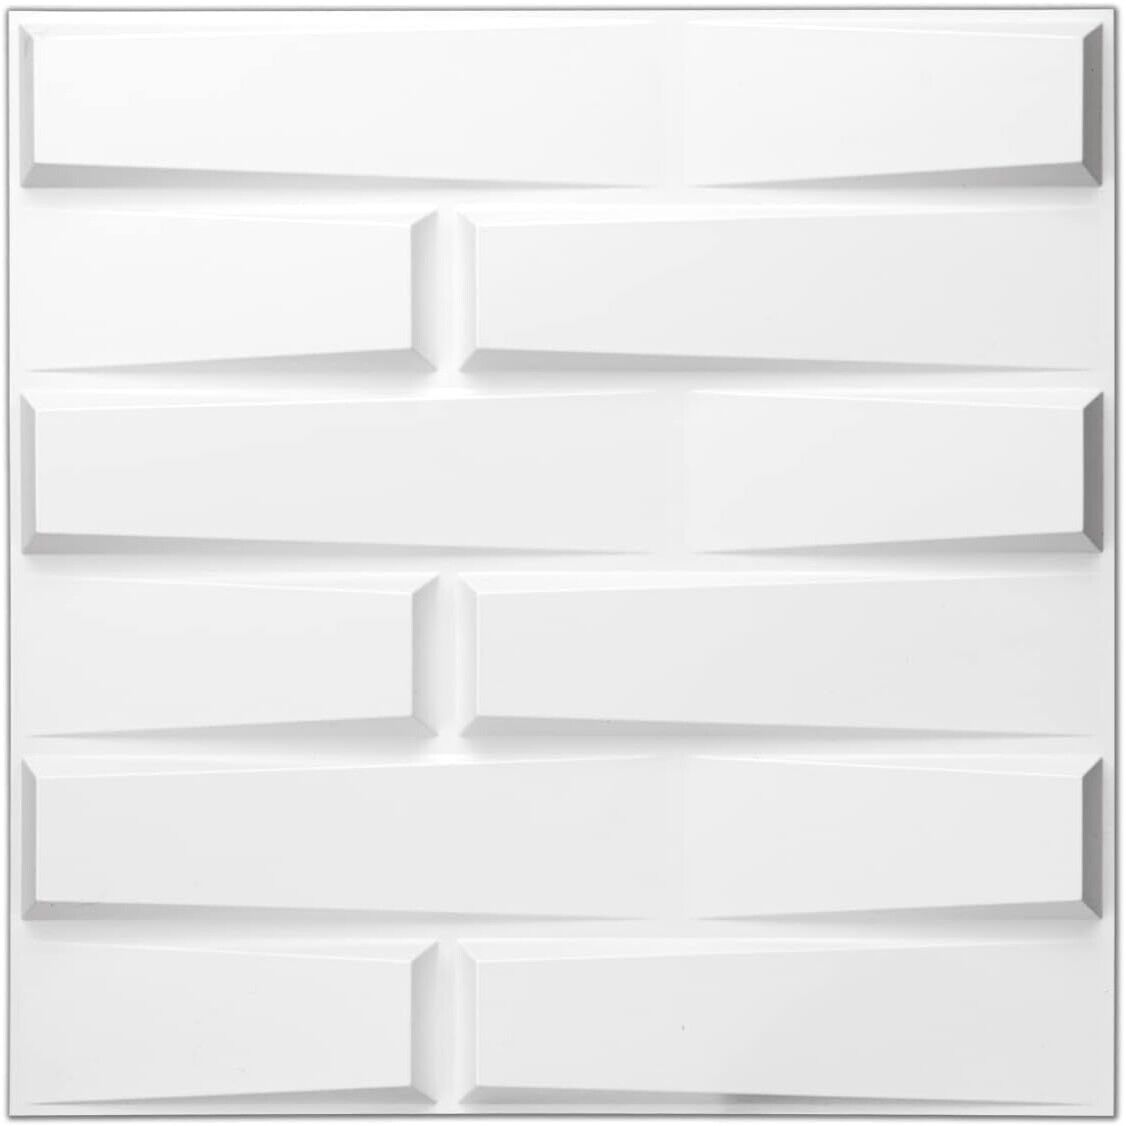 Art3d Decorative 3D PVC Wall Panels - 12-Pack White, 19.7 x 19.7 in.